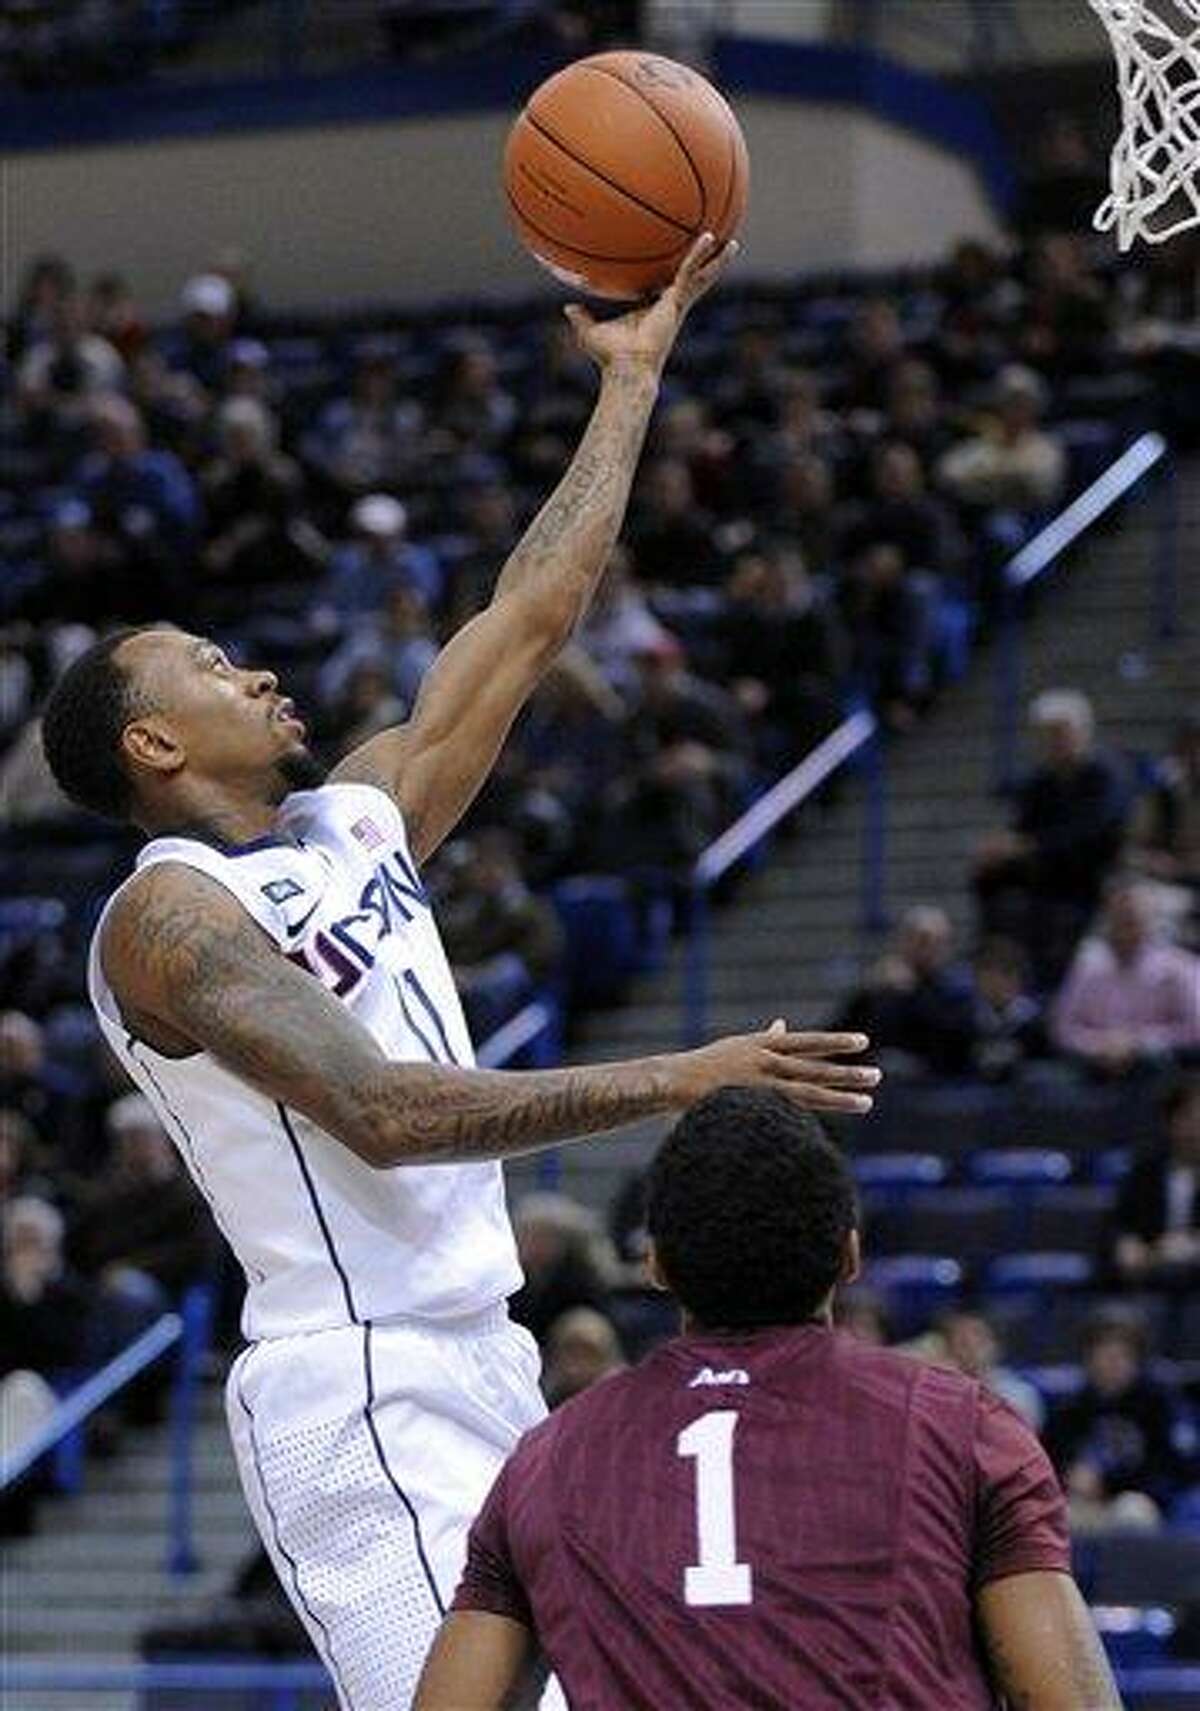 Connecticut's Ryan Boatright, left, drives to the basket as Fordham's Branden Frazier looks on during the first half of an NCAA college basketball game in Hartford, Conn., Friday, Dec. 21, 2012. Boatright and Frazier each scored a game-high 26 points in Connecticut's 88-73 victory. (AP Photo/Fred Beckham)